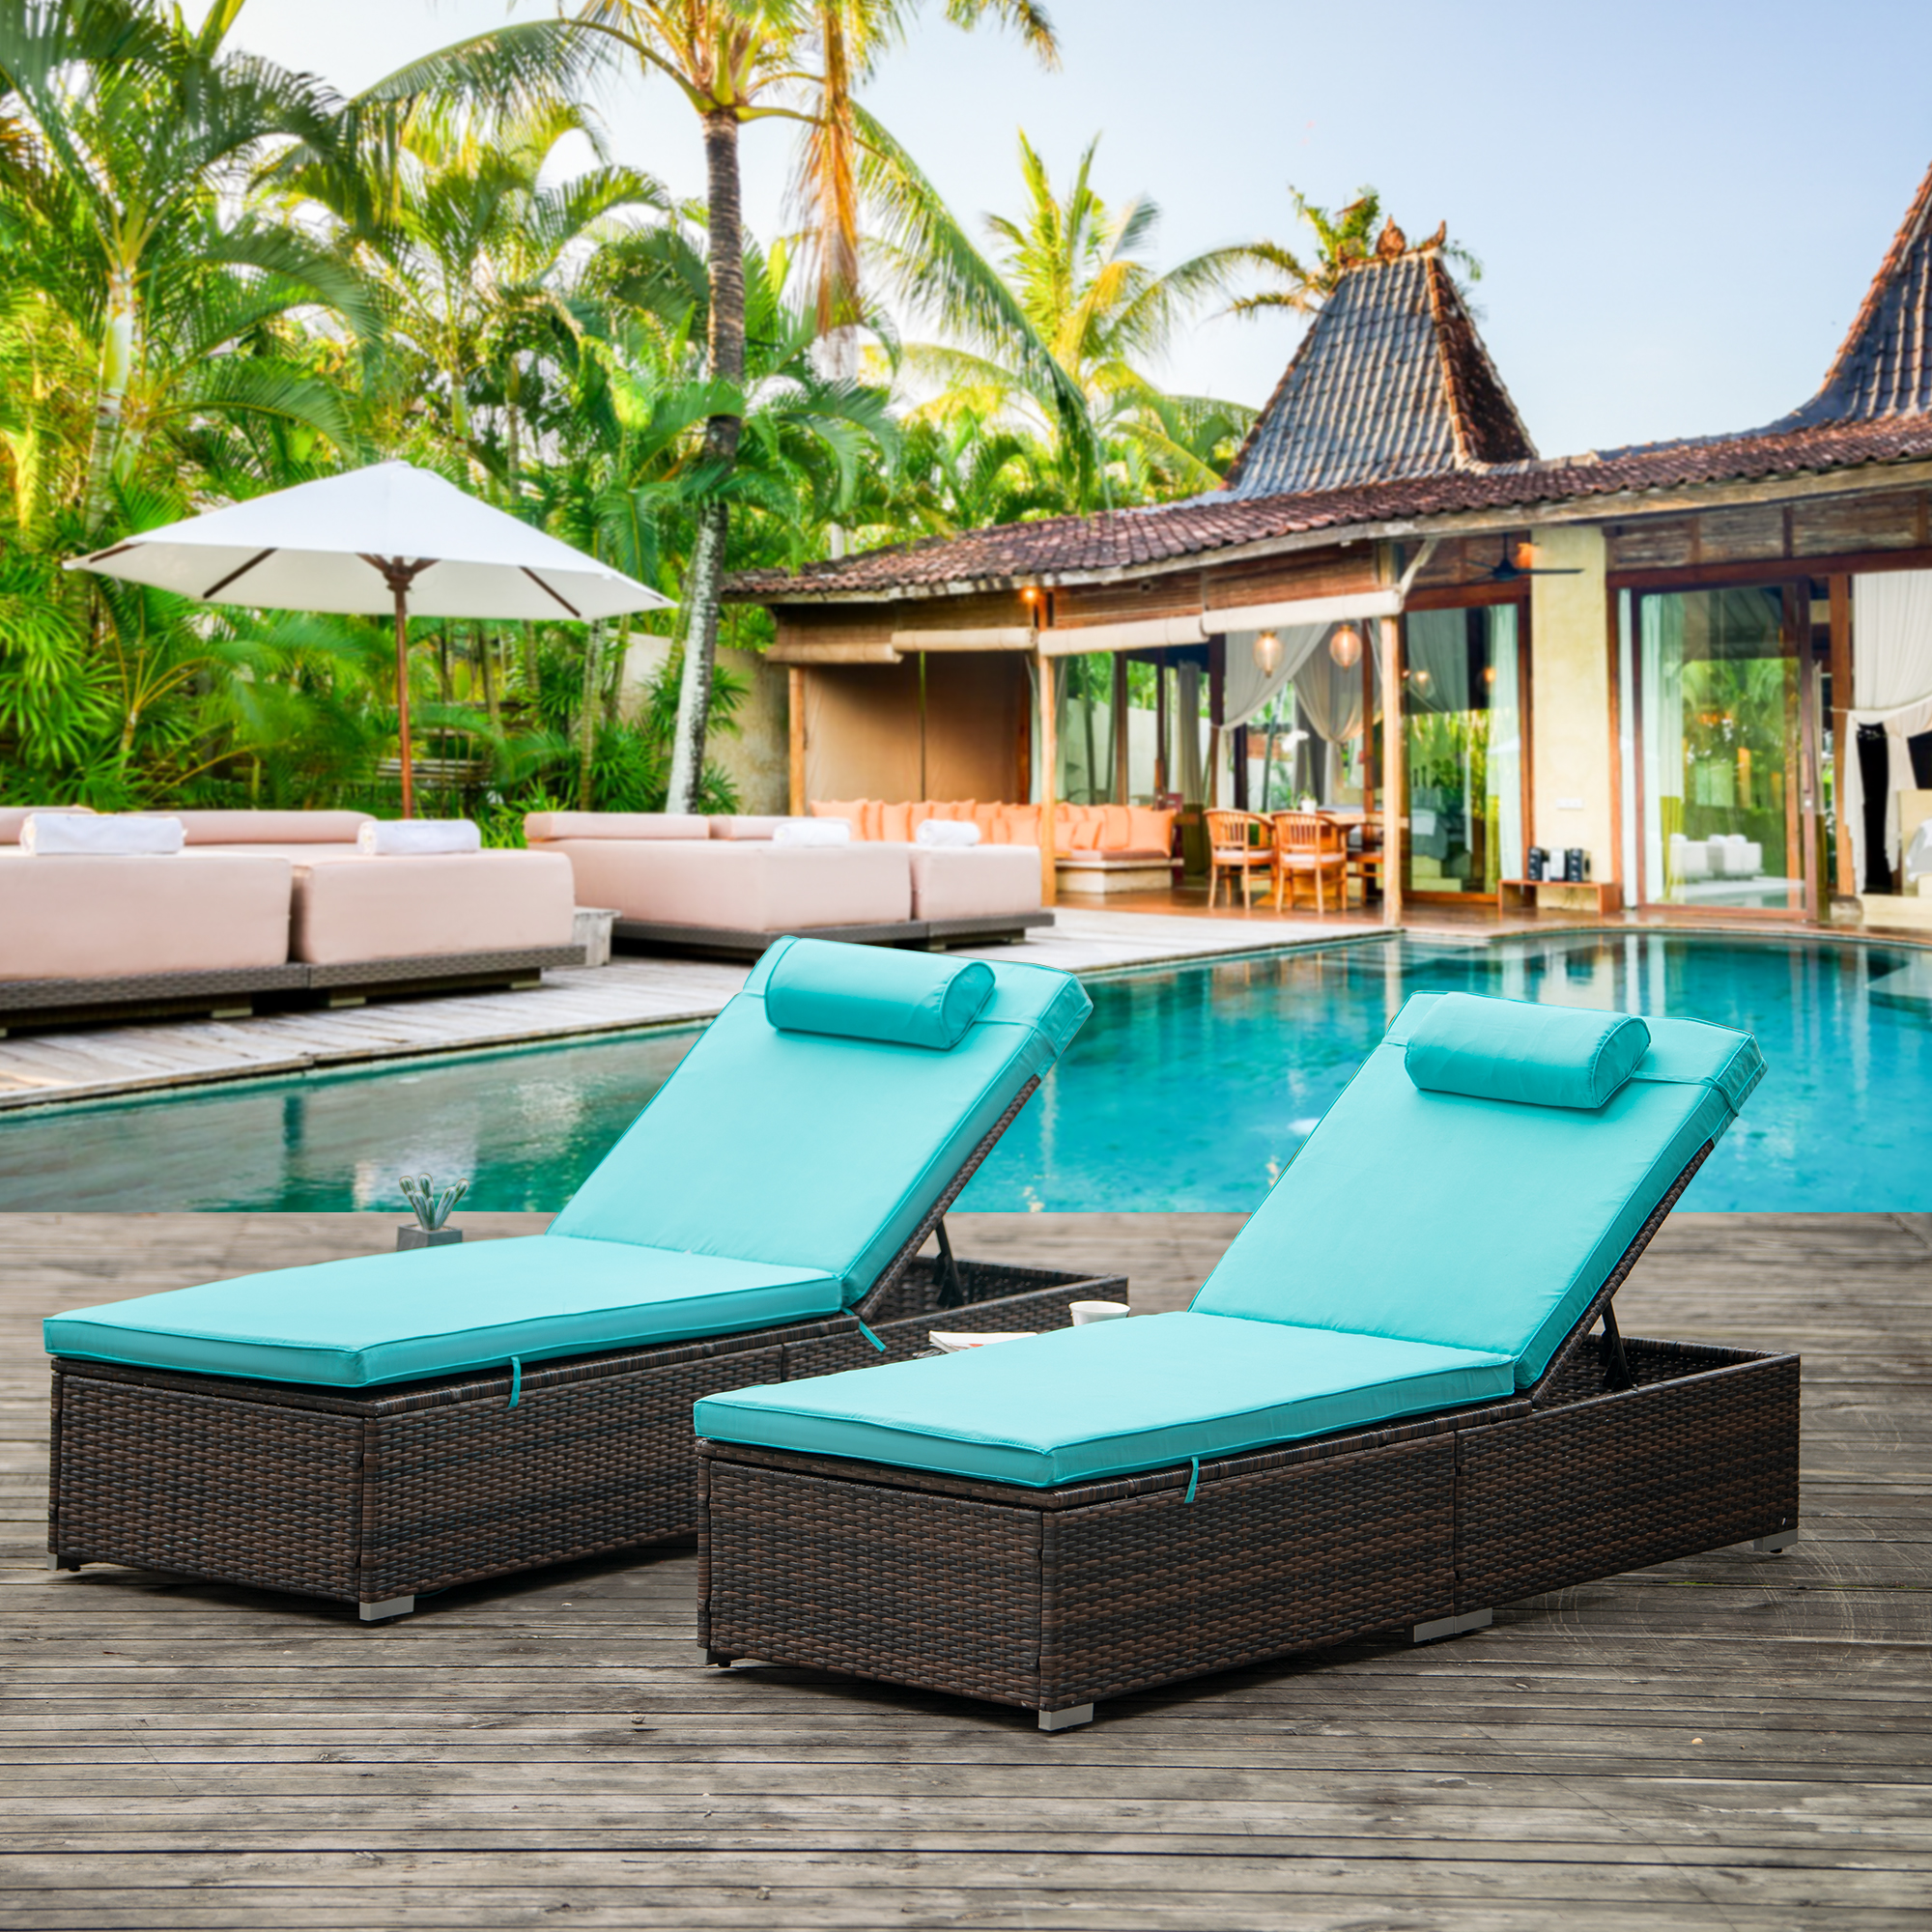 2 Pieces Patio Chaise Lounge Chair Set, PE Rattan Chaise Lounge with Side Table, Sun Chaise Lounge Furniture, Pool Furniture Sunbed with Cushion, Tanning Lounge Chair with 5 Adjustable Positions, B382 - image 1 of 8